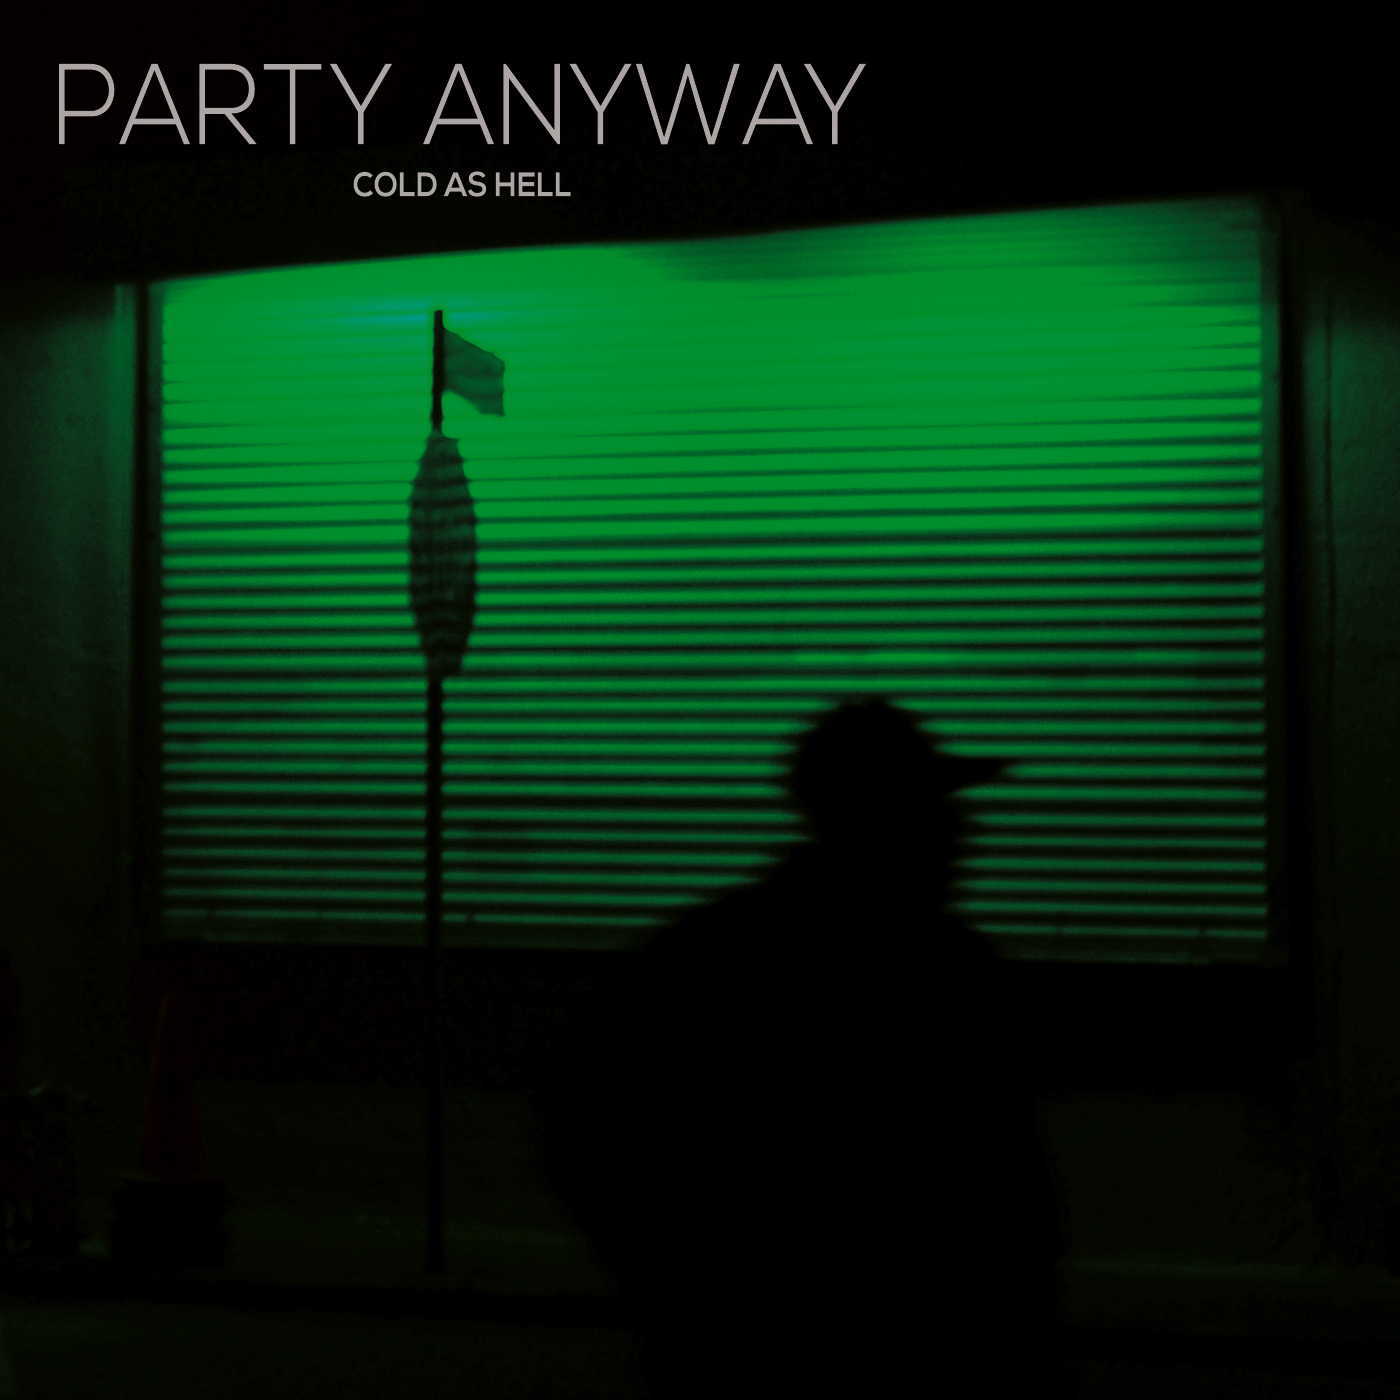 [SODD Premiere] Cold As Hell – “Party Anyway”